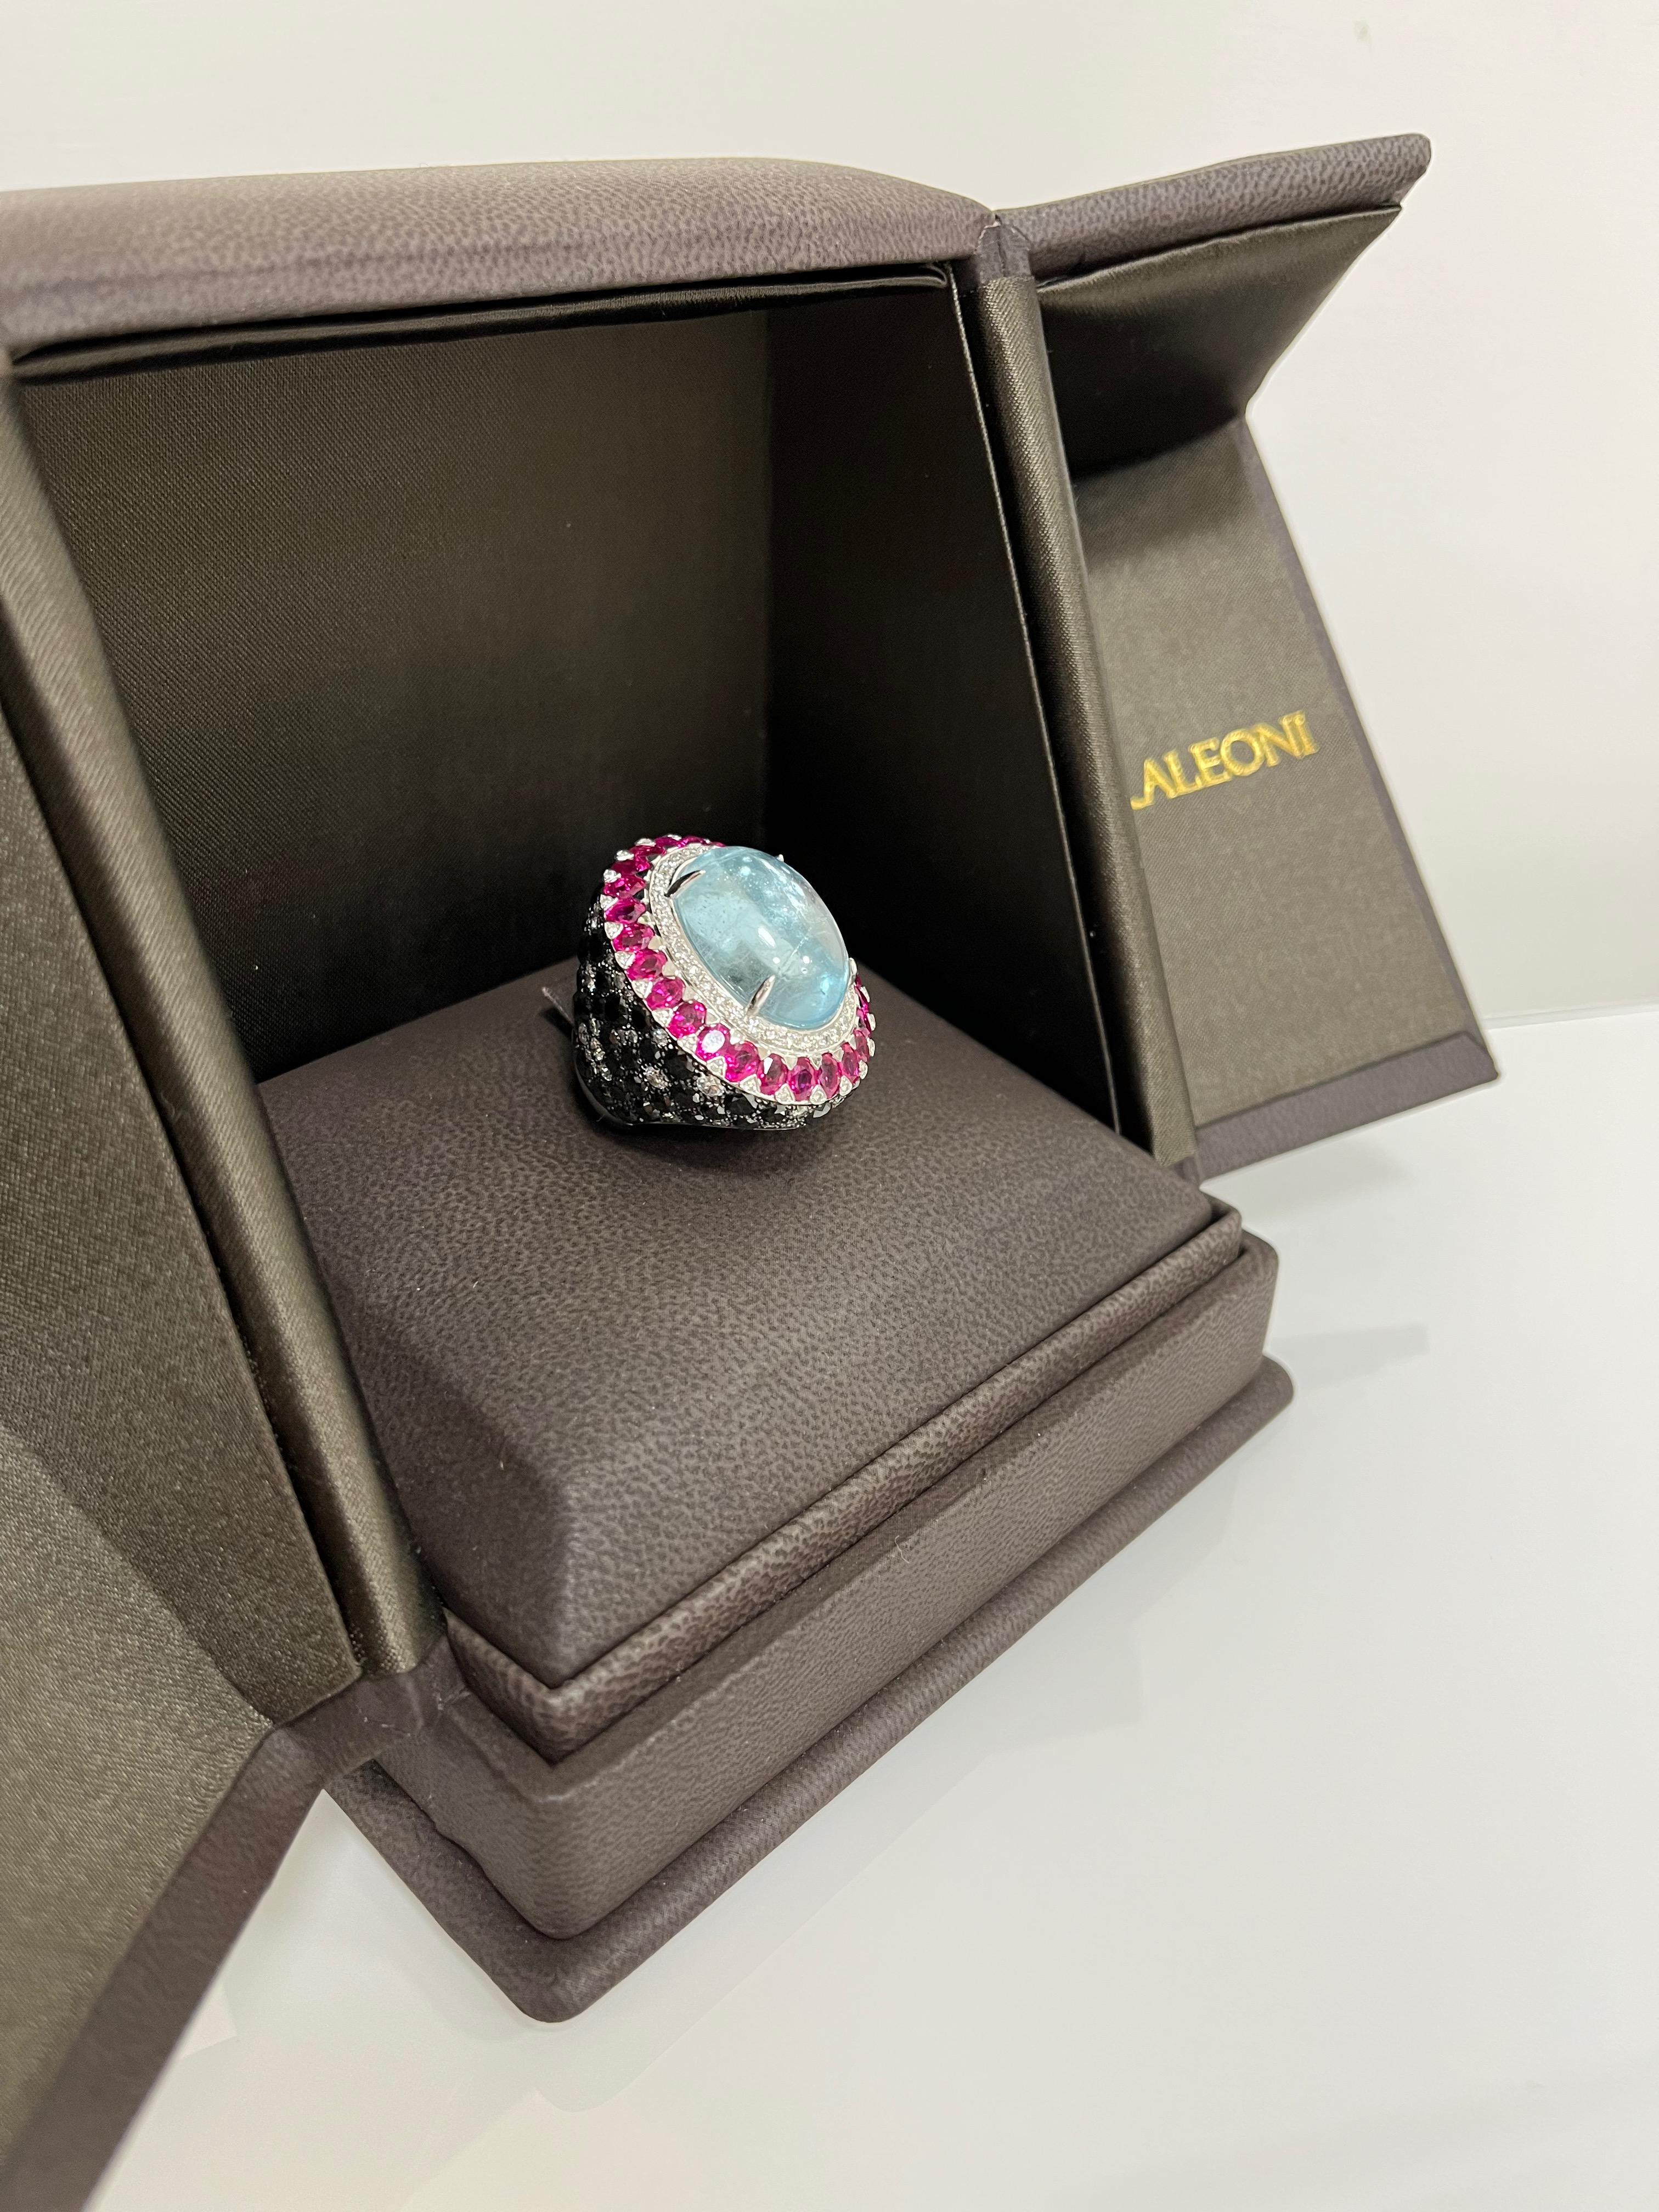 Women's One of a Kind 18 Karat White Gold Black Diamonds Rubies Aquamarine Cocktail Ring For Sale